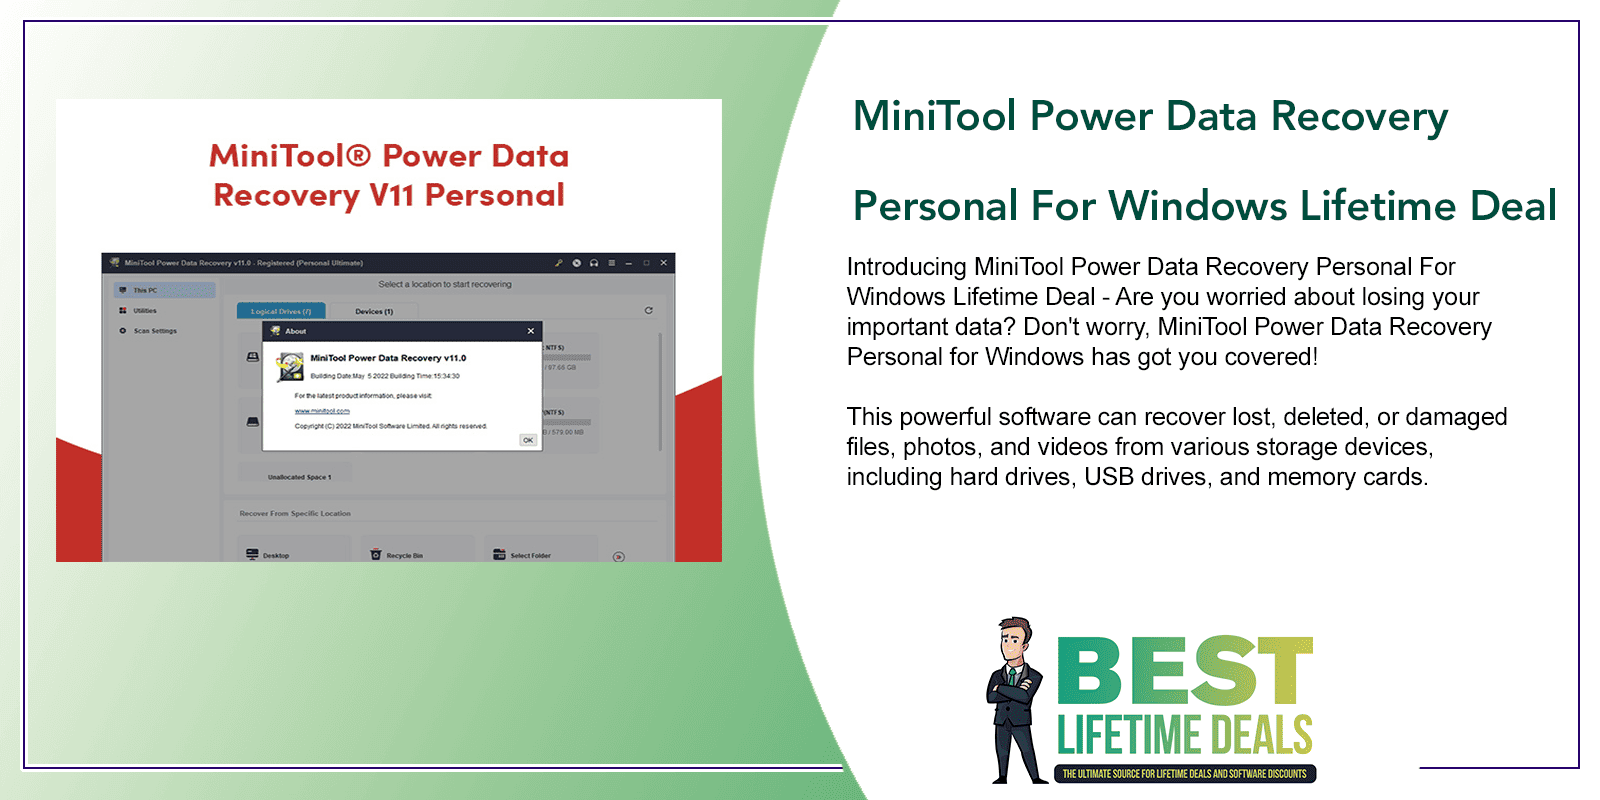 MiniTool Power Data Recovery Personal Featured Image